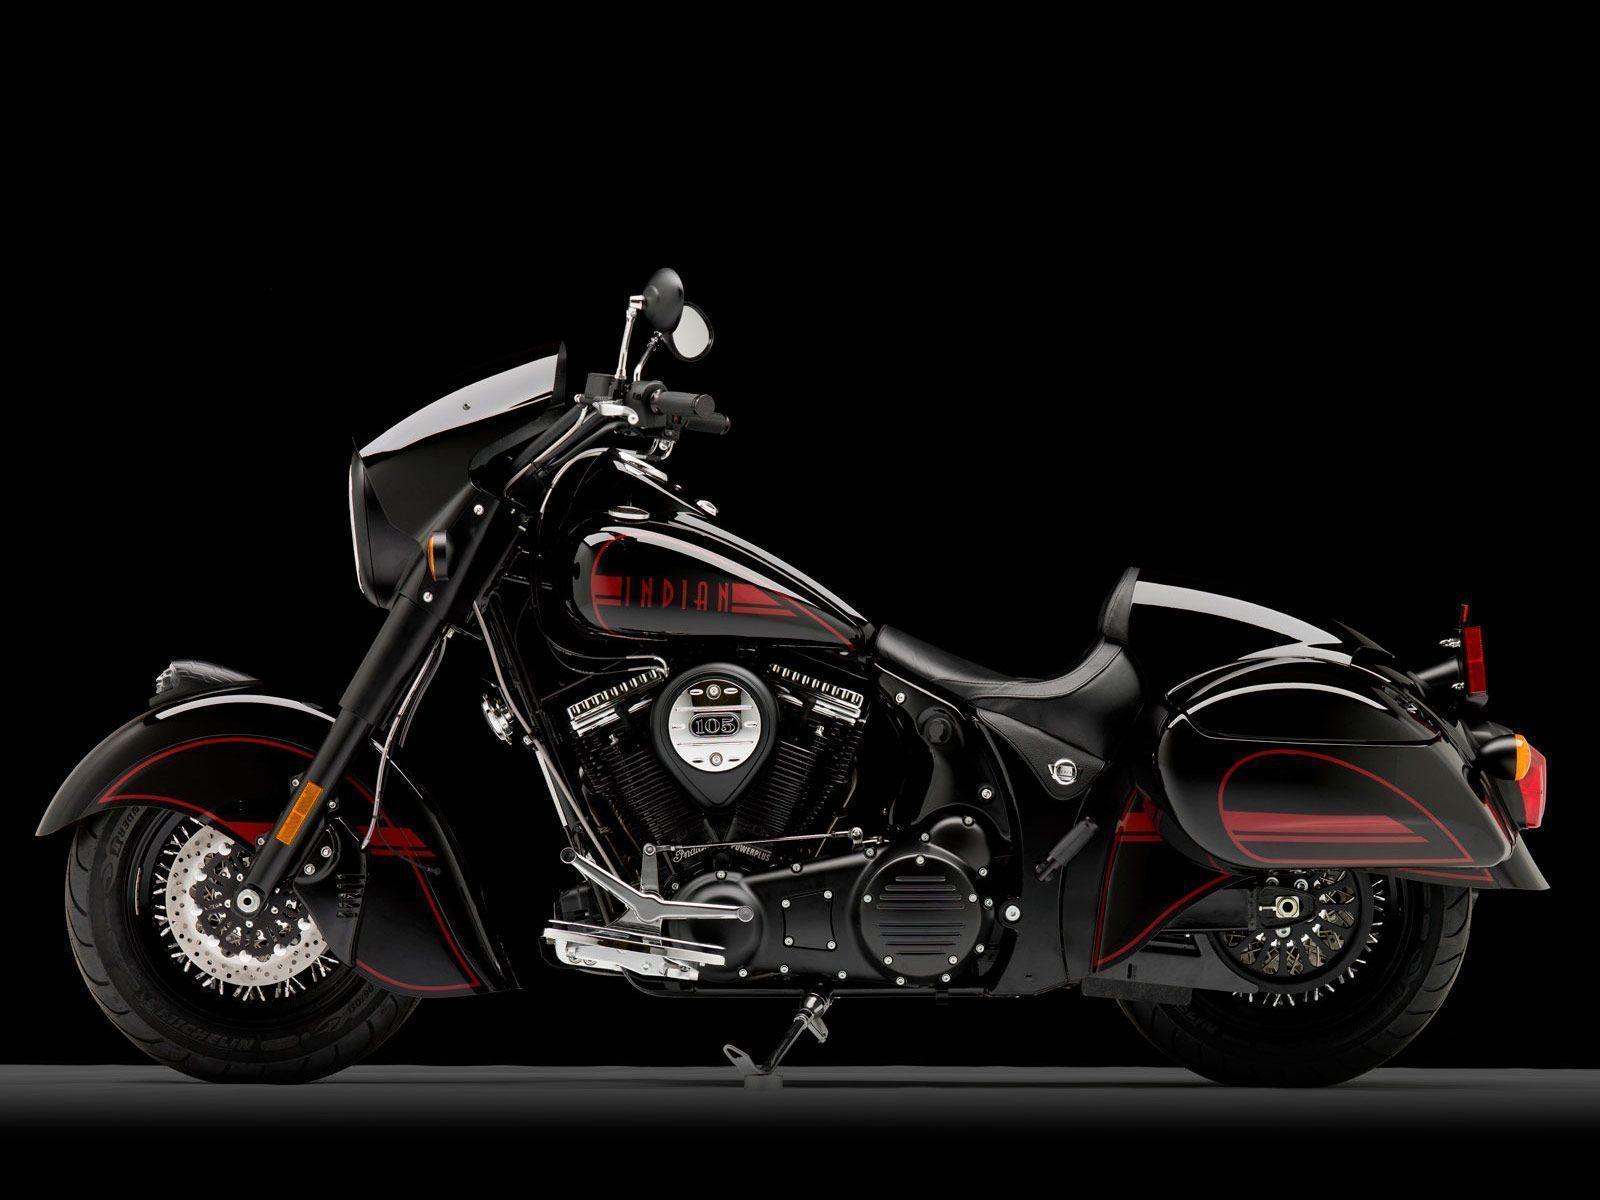 Indian Chieftain Wallpapers